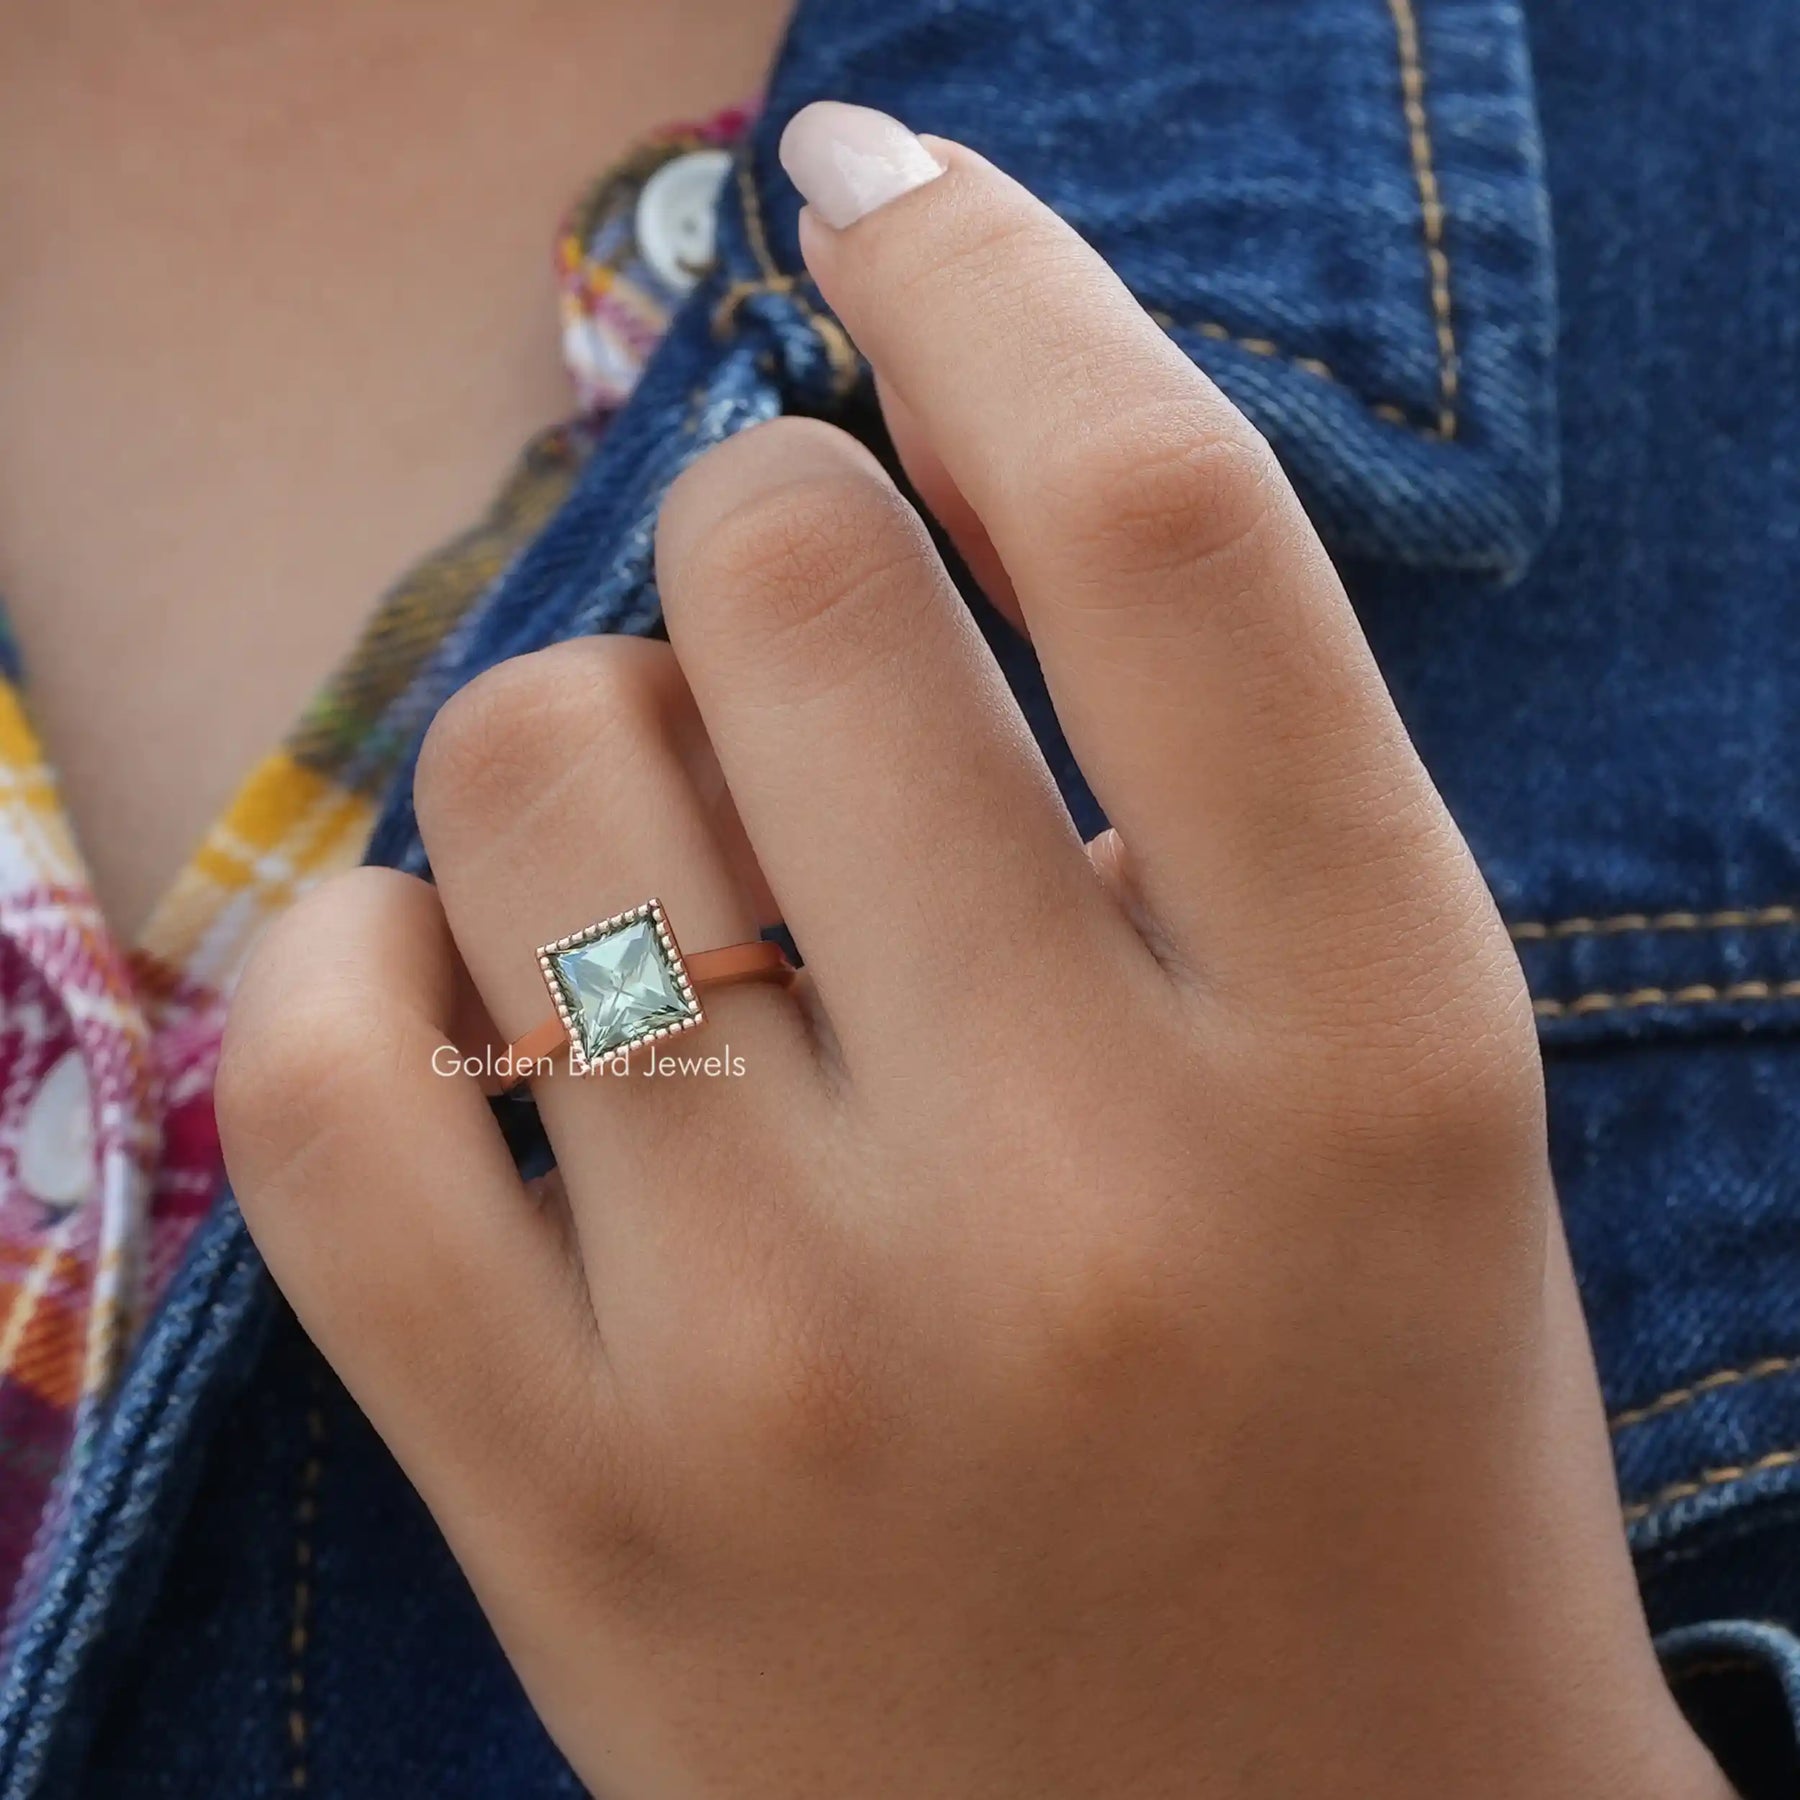 [In finger front view of mint green princess cut stone made of rose gold]-[Golden Bird Jewels]